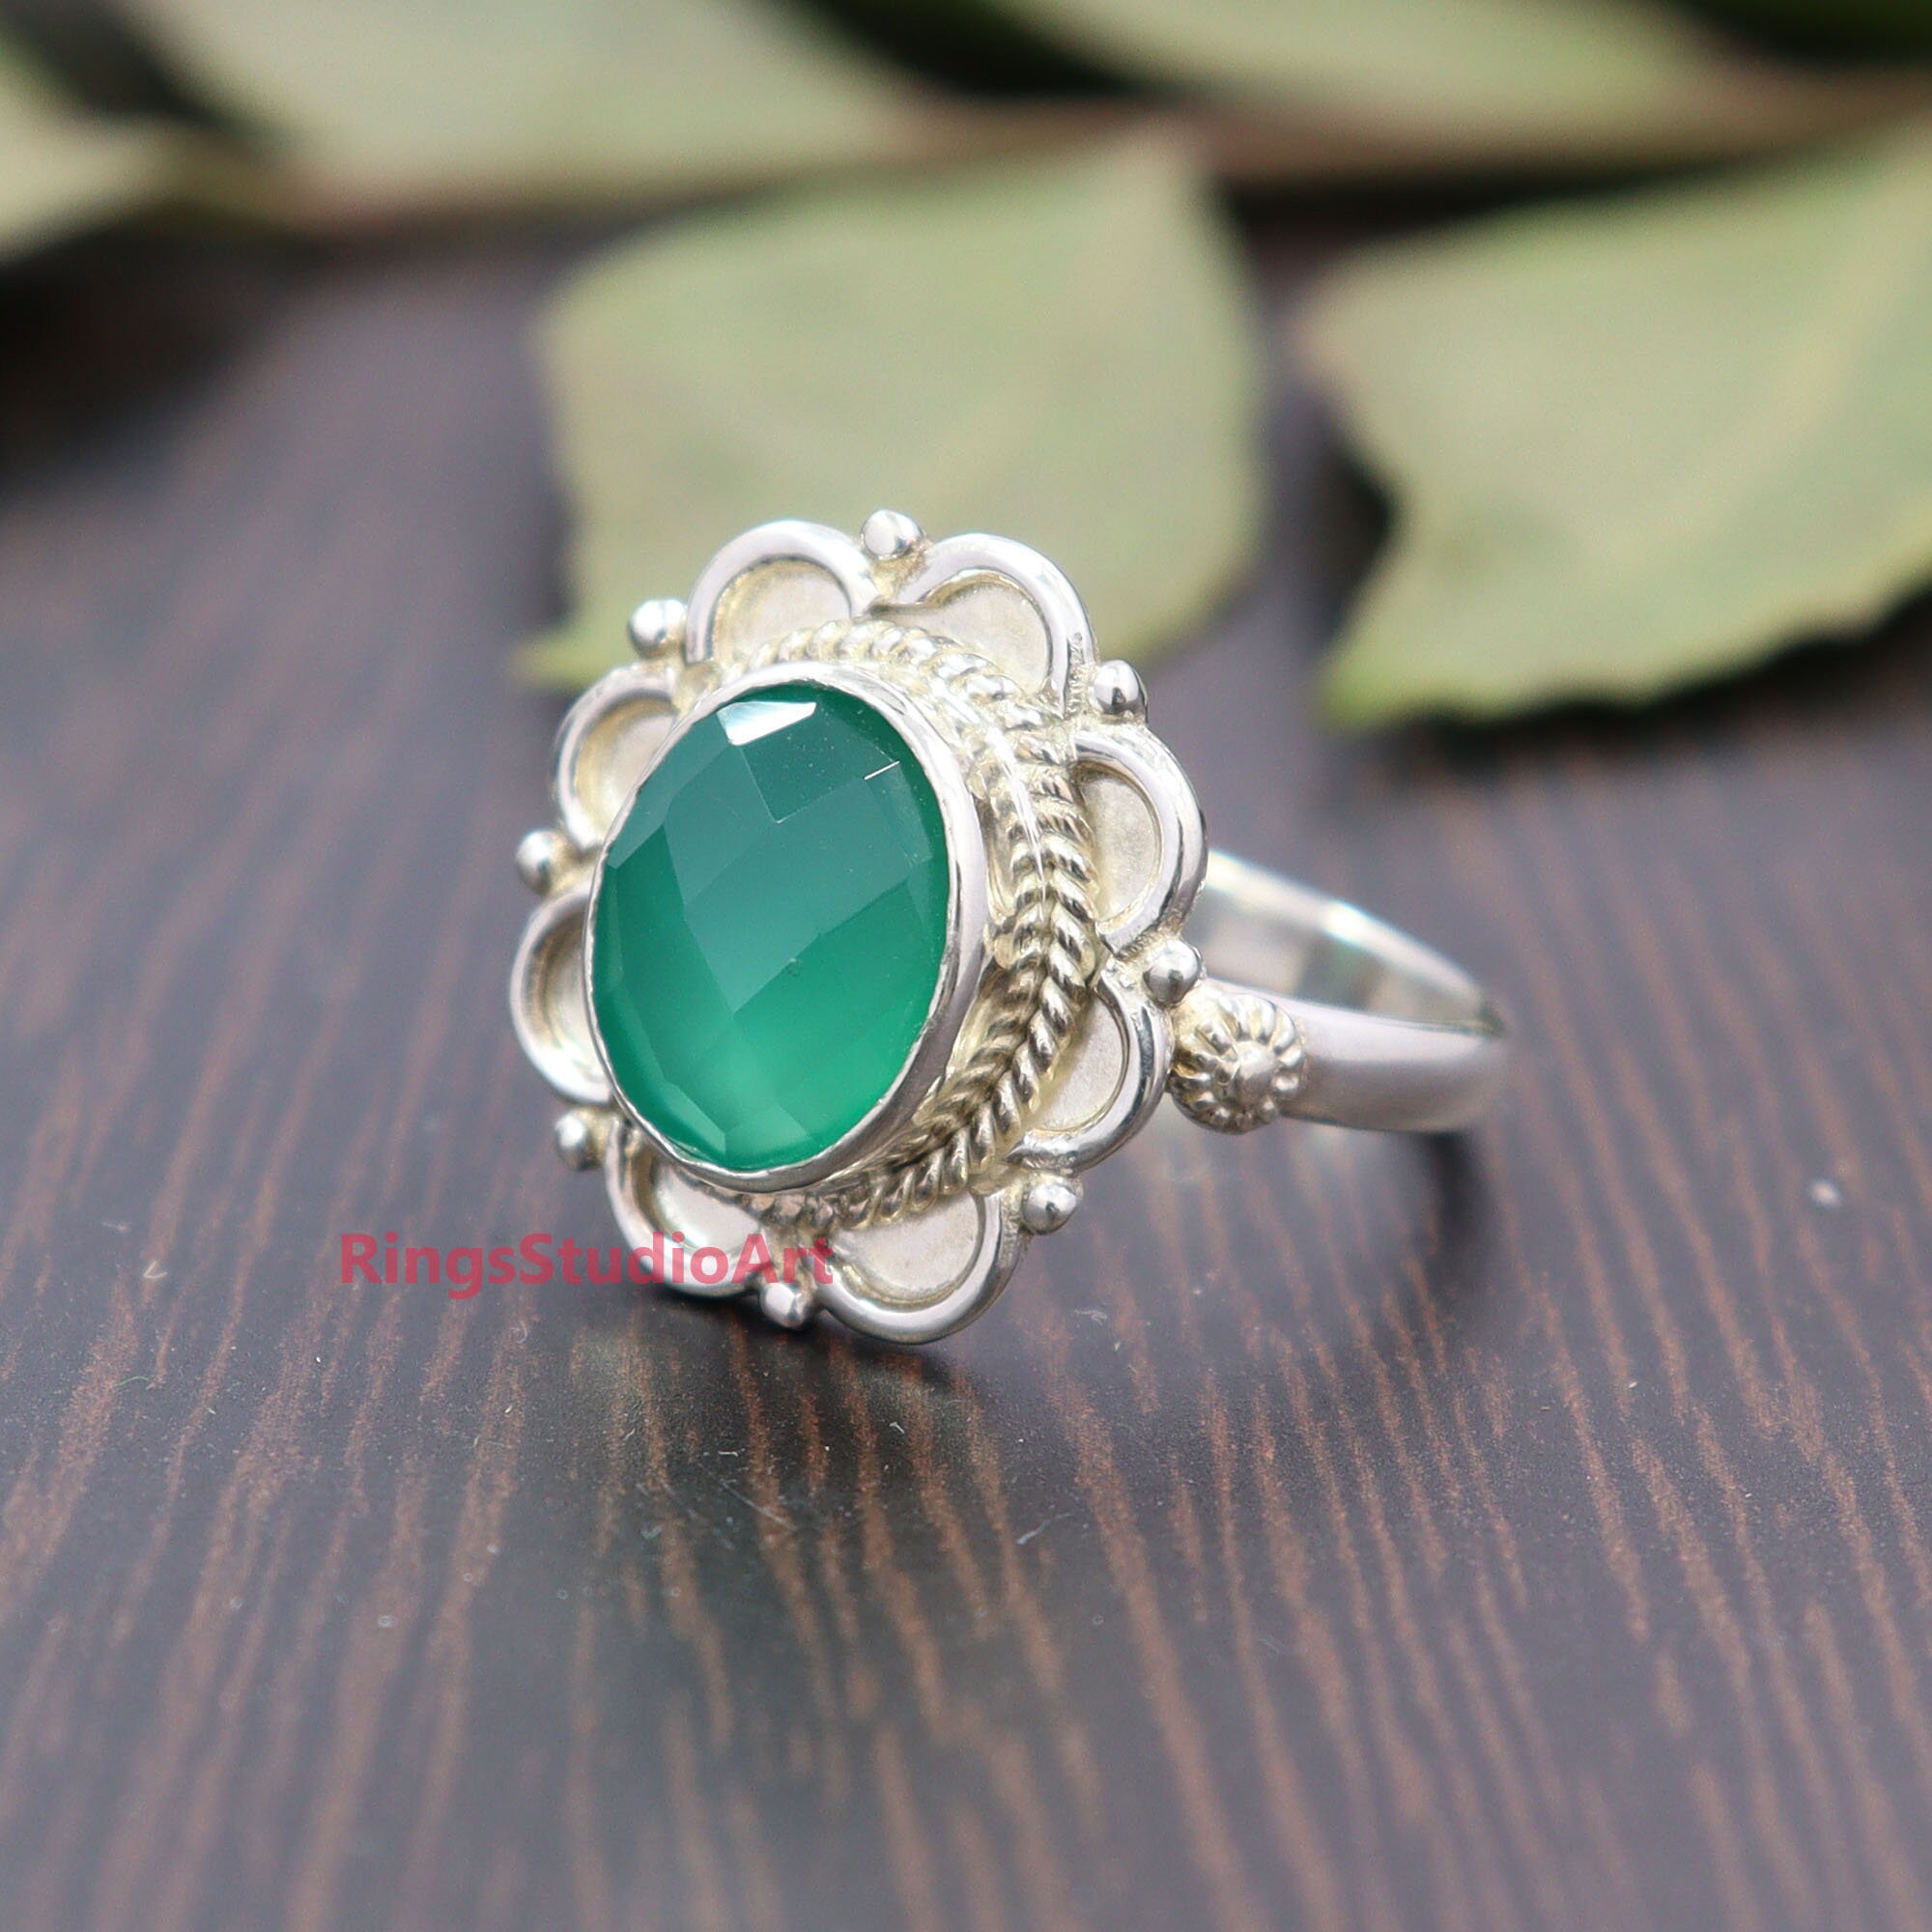 Green Onyx 925 Silver Plated Handmade Jewelry Ring US Size 10.25 R-19487